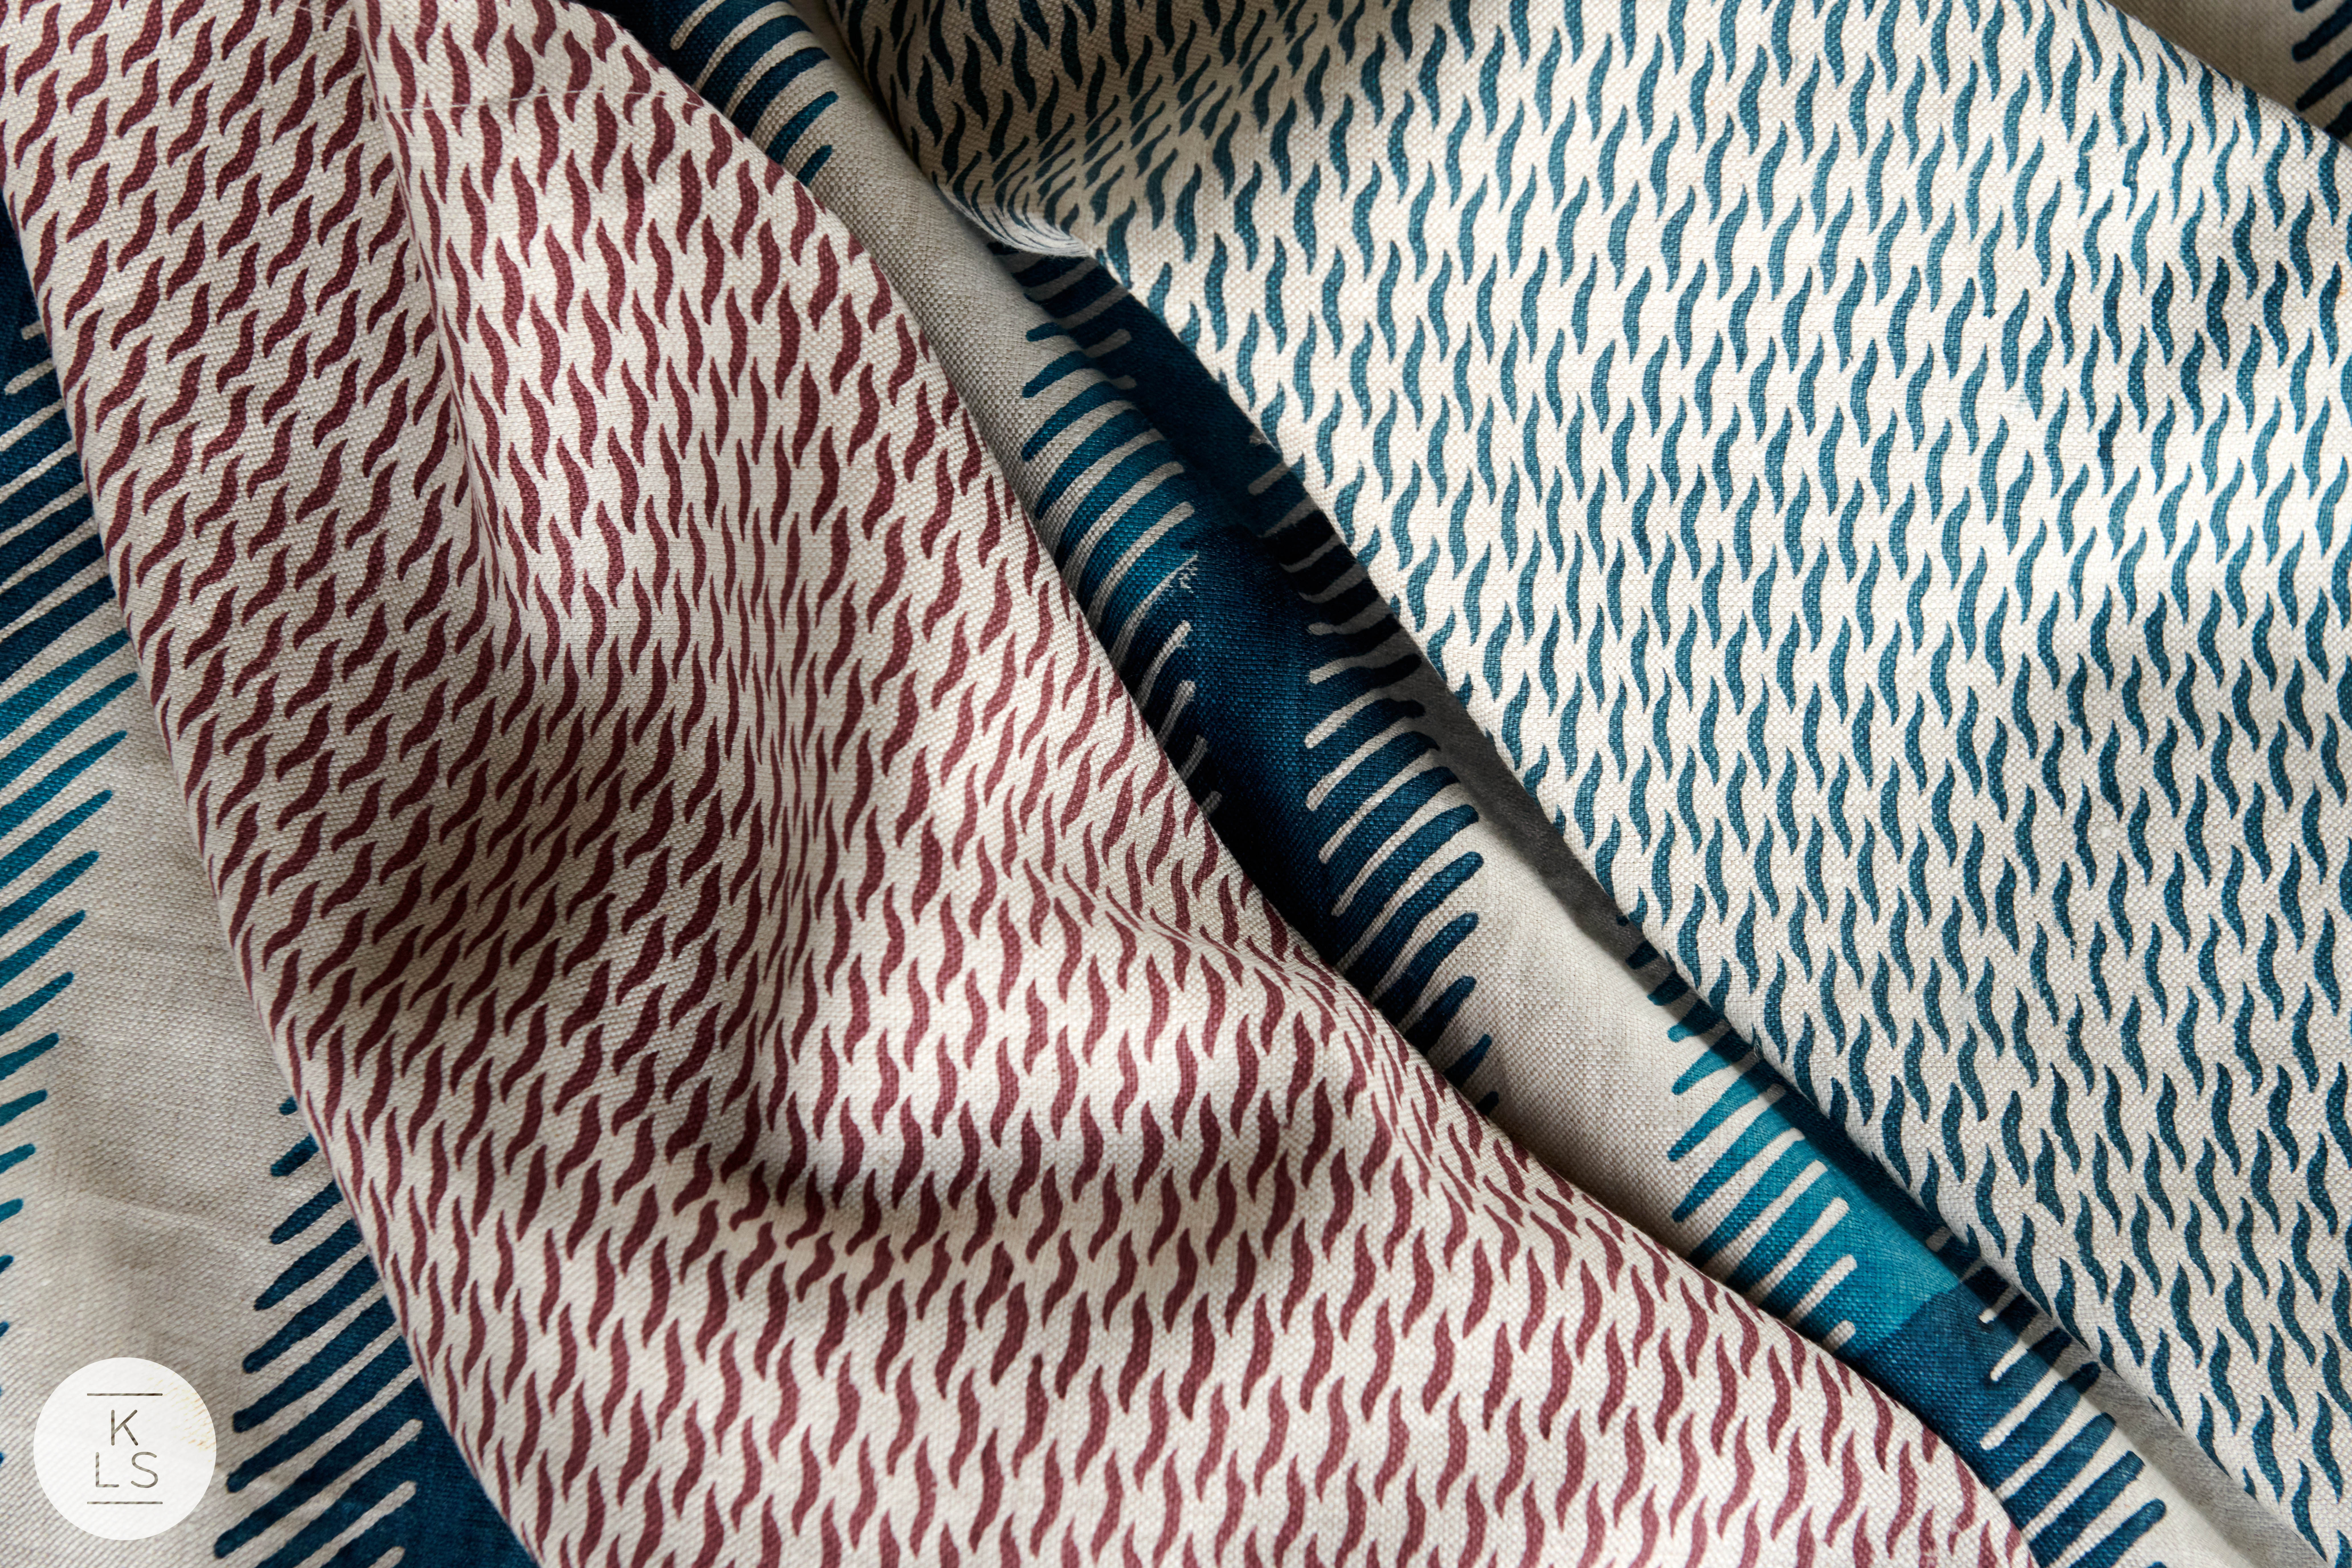 The two outer fabrics are from the Tiger Tiger Collection in Amini Blue and Wineberry; the collection was inspired by a tiger's coat.The center fabric is the Dekka Strip in Nila Blue.